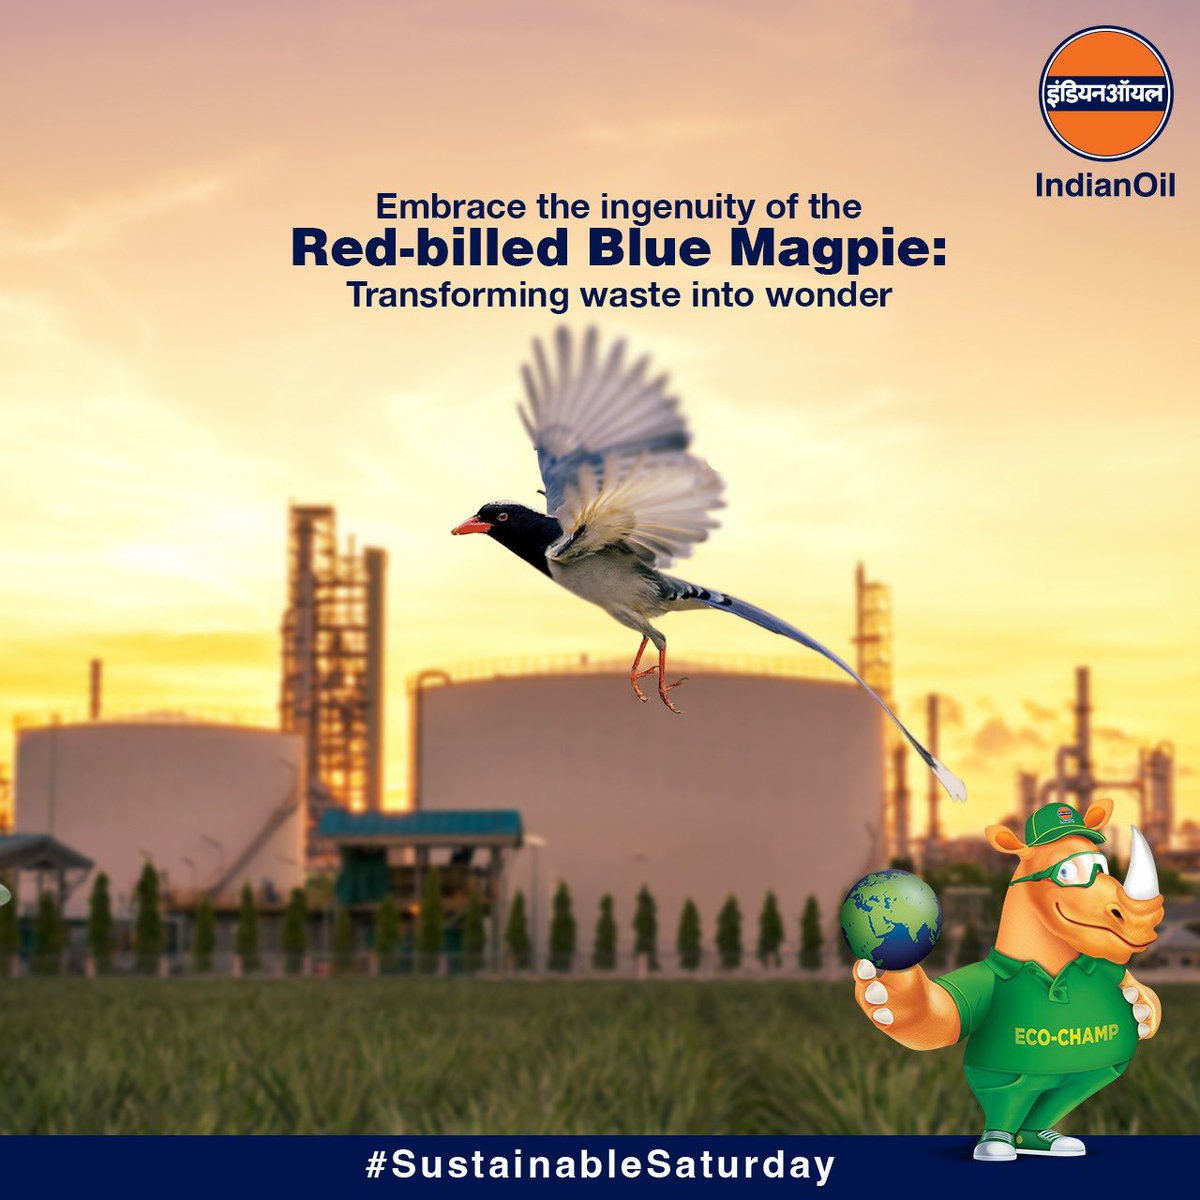 This #SustainableSaturday, we celebrate the Red-billed Blue Magpie, a longtime visitor at IndianOil’s Una Terminal & LPG Bottling plant. Just as this clever bird reuses materials for its needs, IndianOil is leading by example through organic waste management. Let’s all commit to